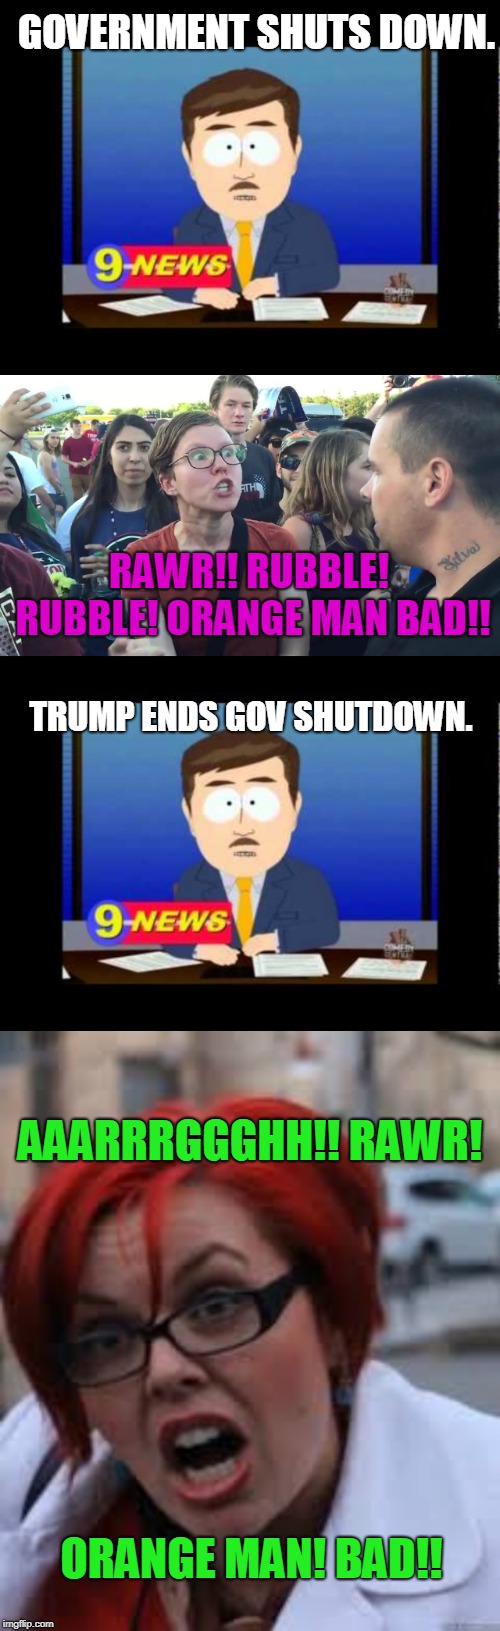 Is it me? Or seems like there's a glitch in the Matrix? | GOVERNMENT SHUTS DOWN. RAWR!! RUBBLE! RUBBLE! ORANGE MAN BAD!! TRUMP ENDS GOV SHUTDOWN. AAARRRGGGHH!! RAWR! ORANGE MAN! BAD!! | image tagged in south park news reporter,sjw triggered,orange man bad | made w/ Imgflip meme maker